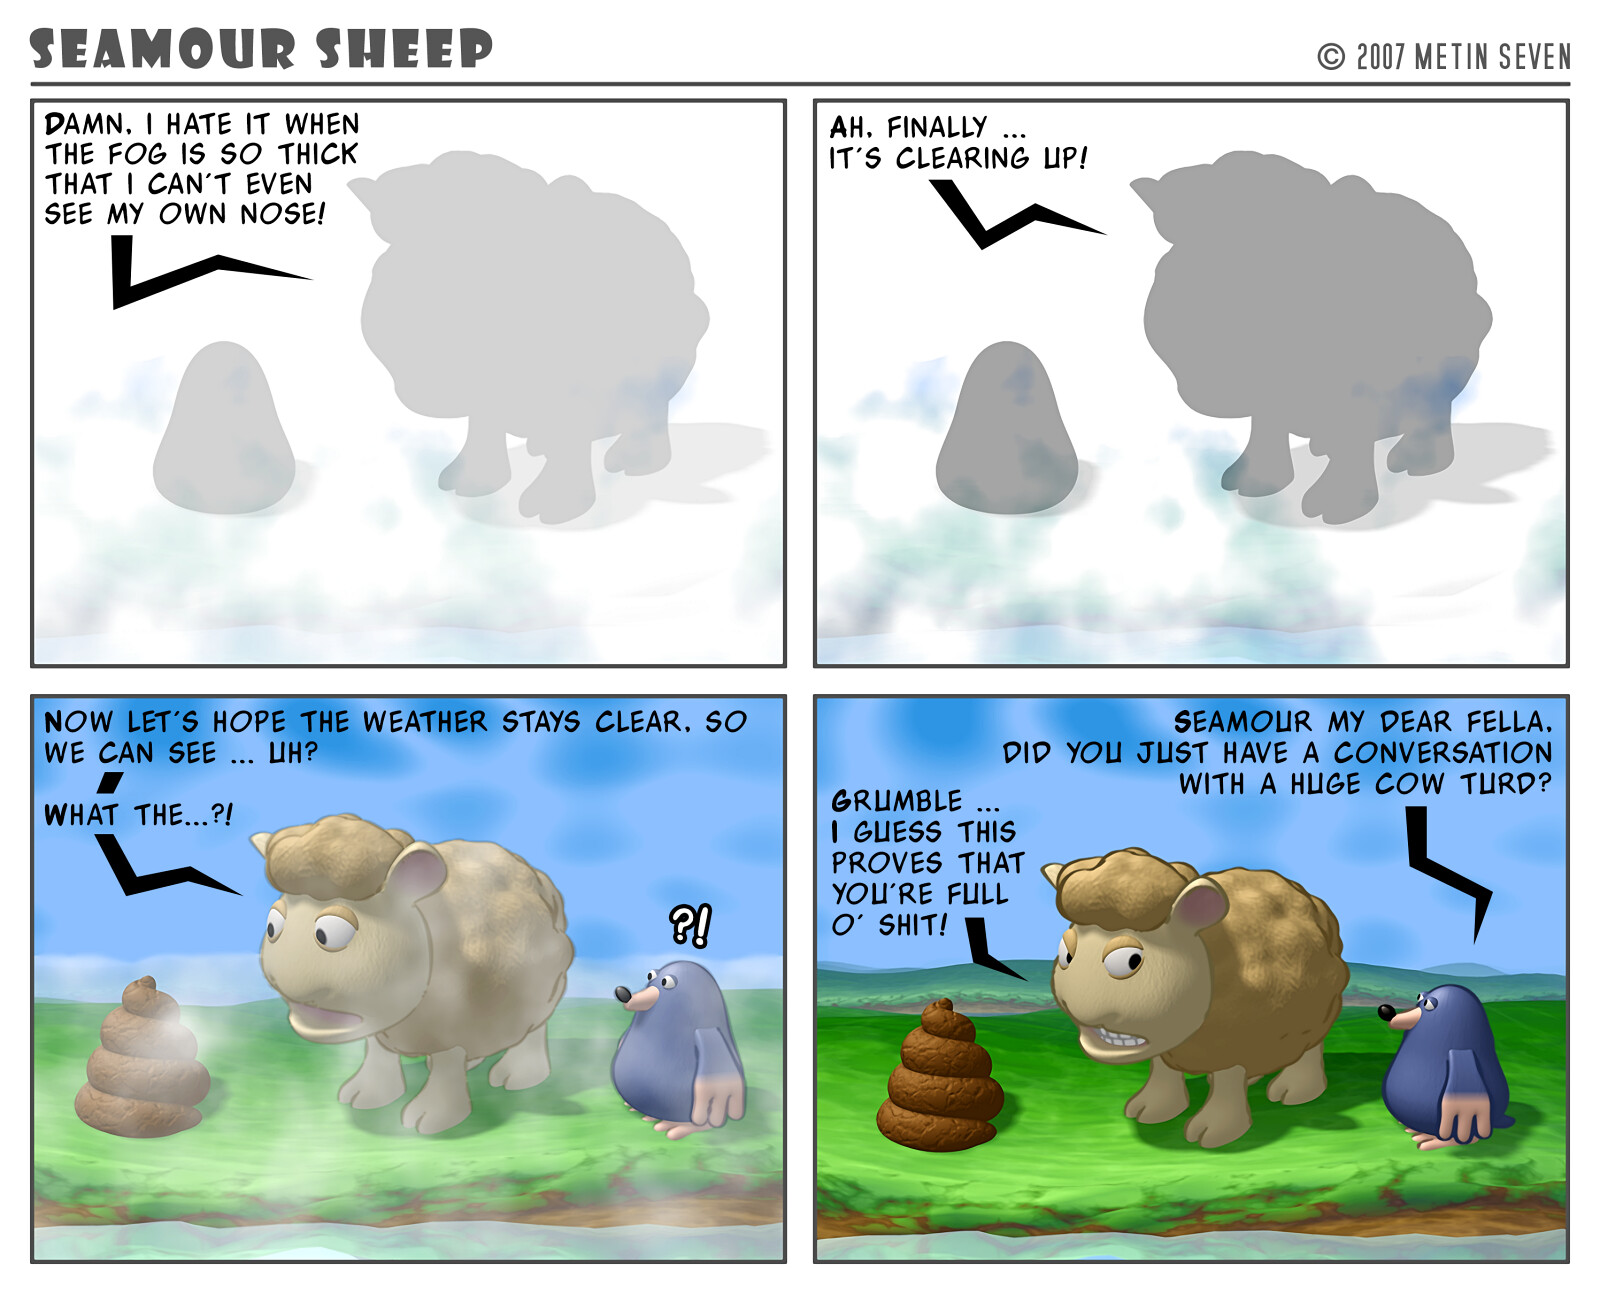 Seamour Sheep and Marty Mole comic strip episode: Conversation